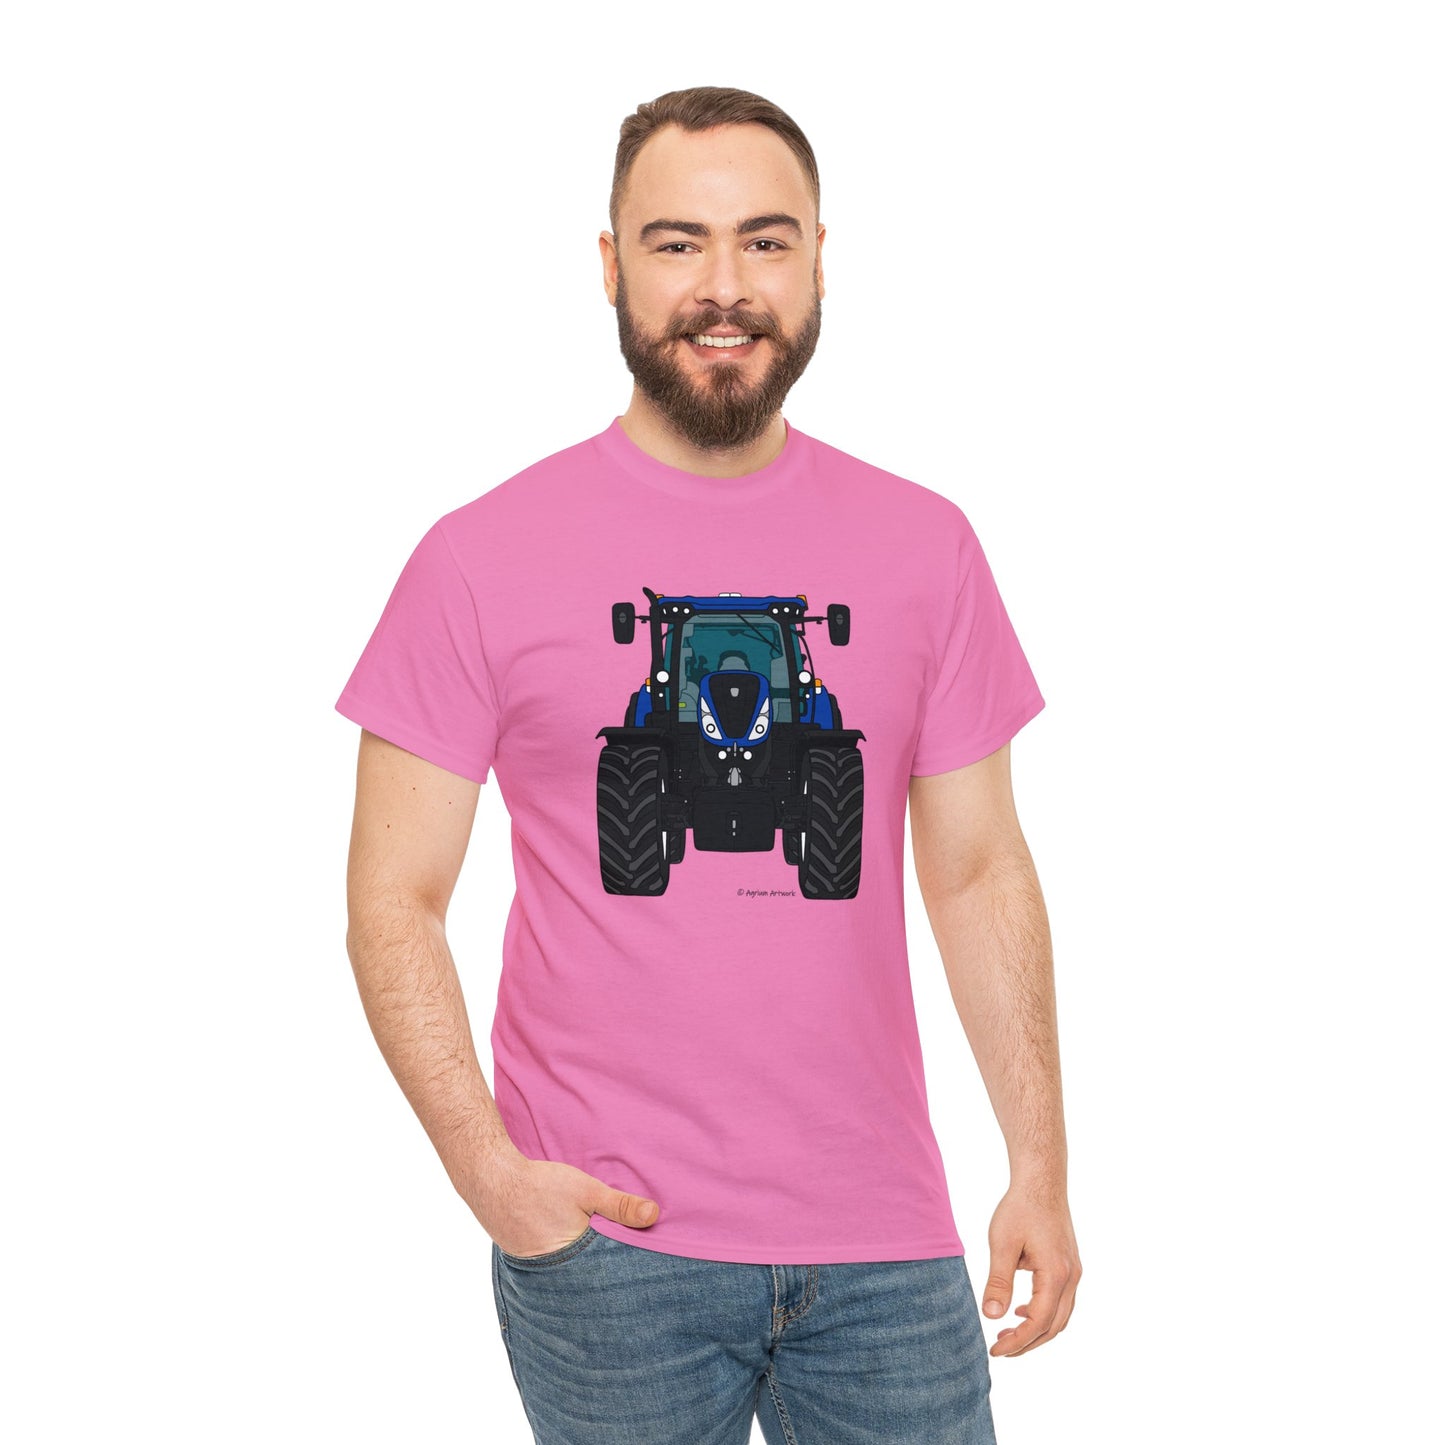 New Holland T7 Tractor - Adult Classic Fit Cartoon T-Shirt